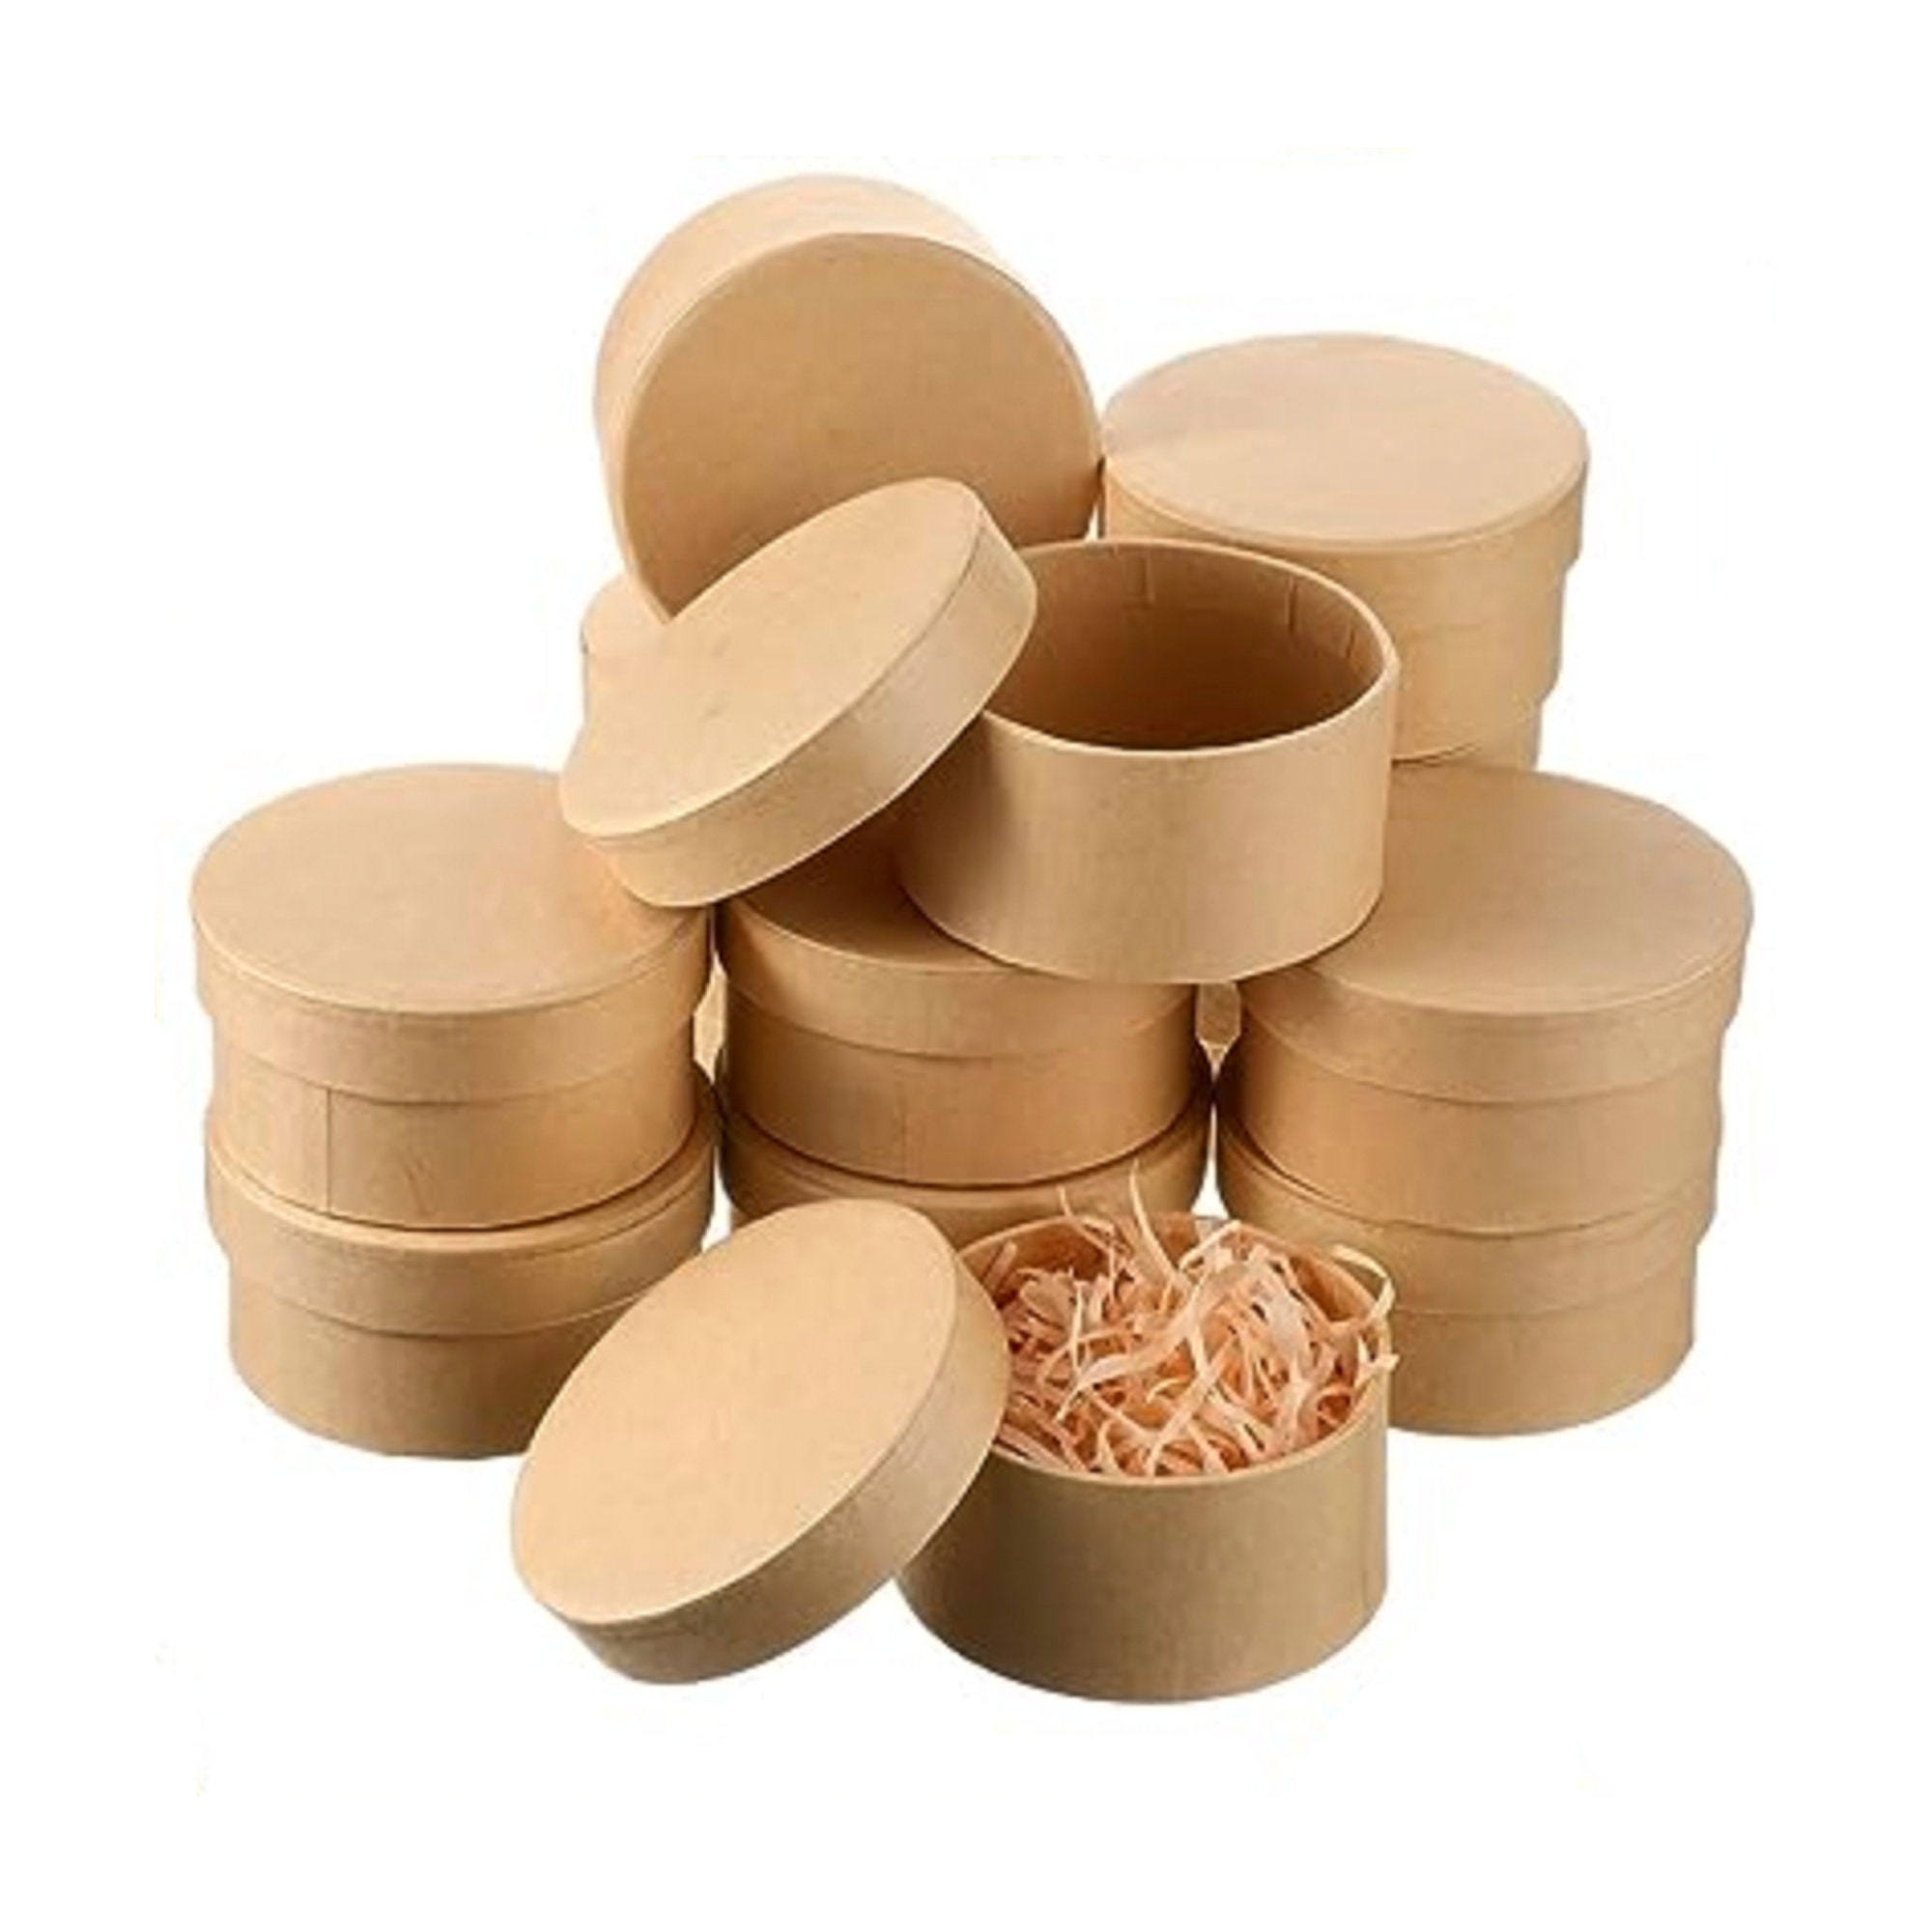 Darice 3 Piece Set of Small Round Nesting Paper Mache Boxes, With 4, 5, 6  Inch Diameters, No. 2849-04, New and Sealed, Craft Material 